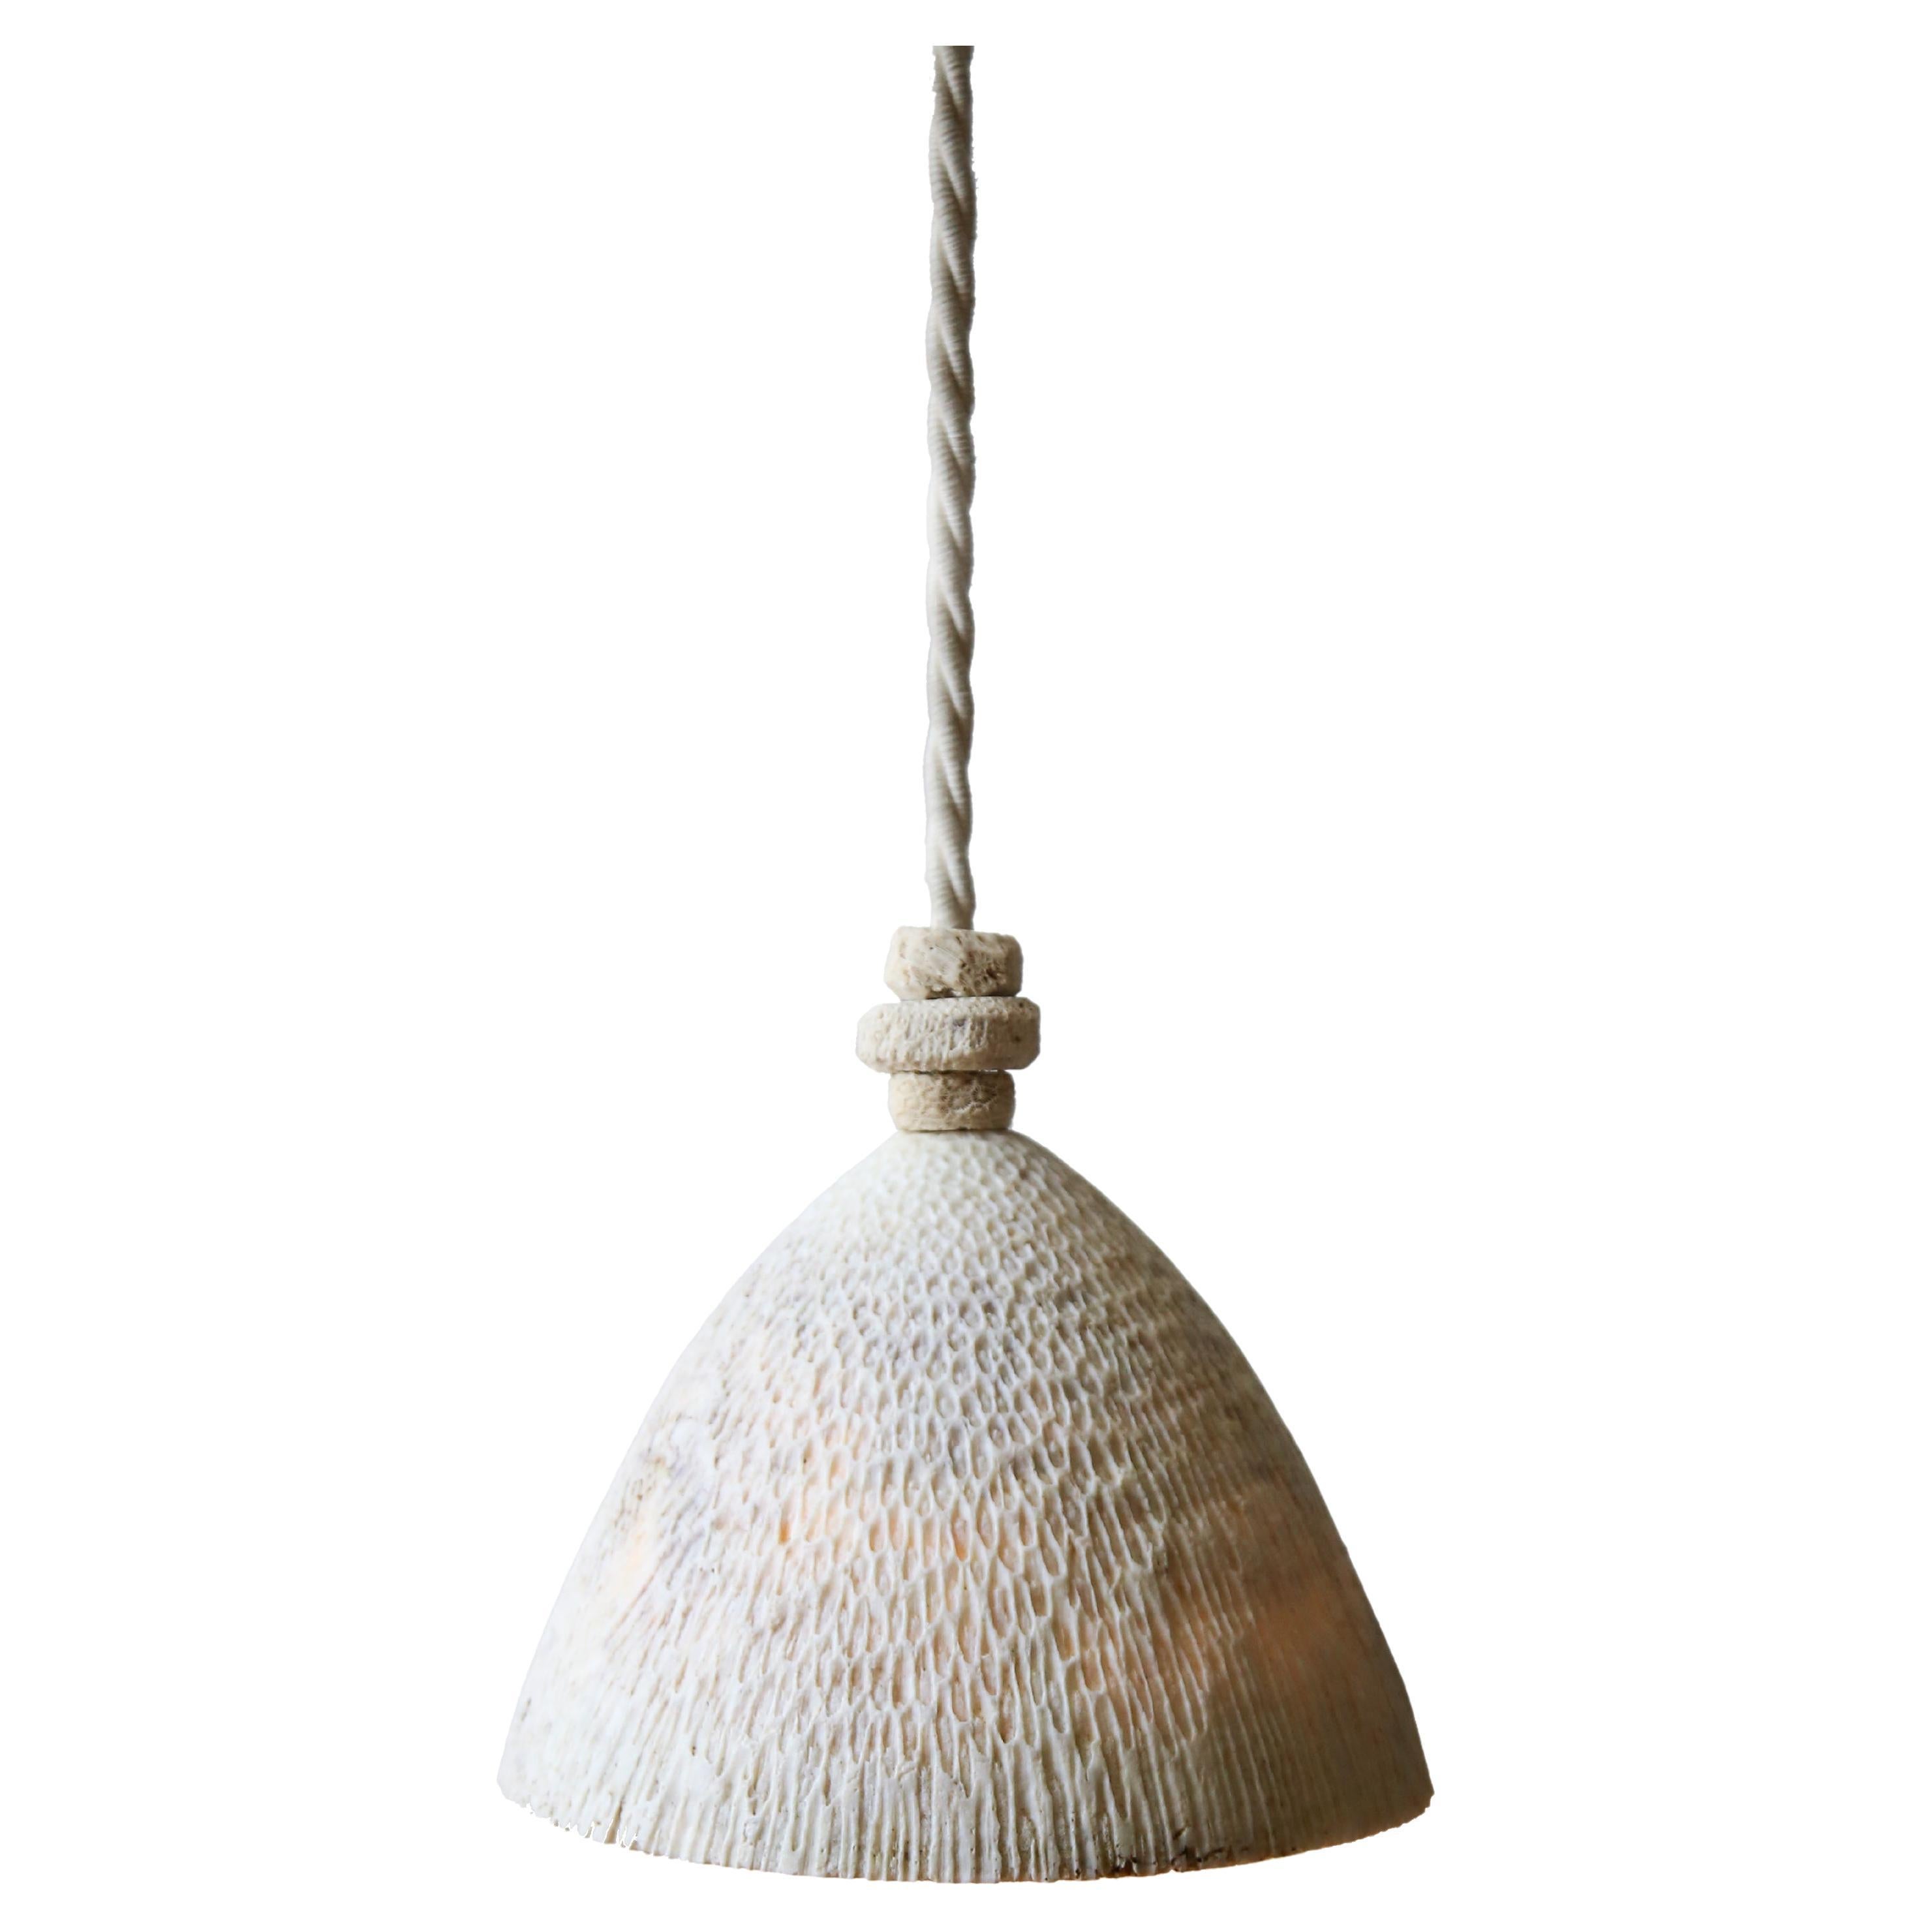 Fossil Coral Cone Hanging Pendant (XL) Hand Crafted Ethical Rustic Chic, Minimal For Sale